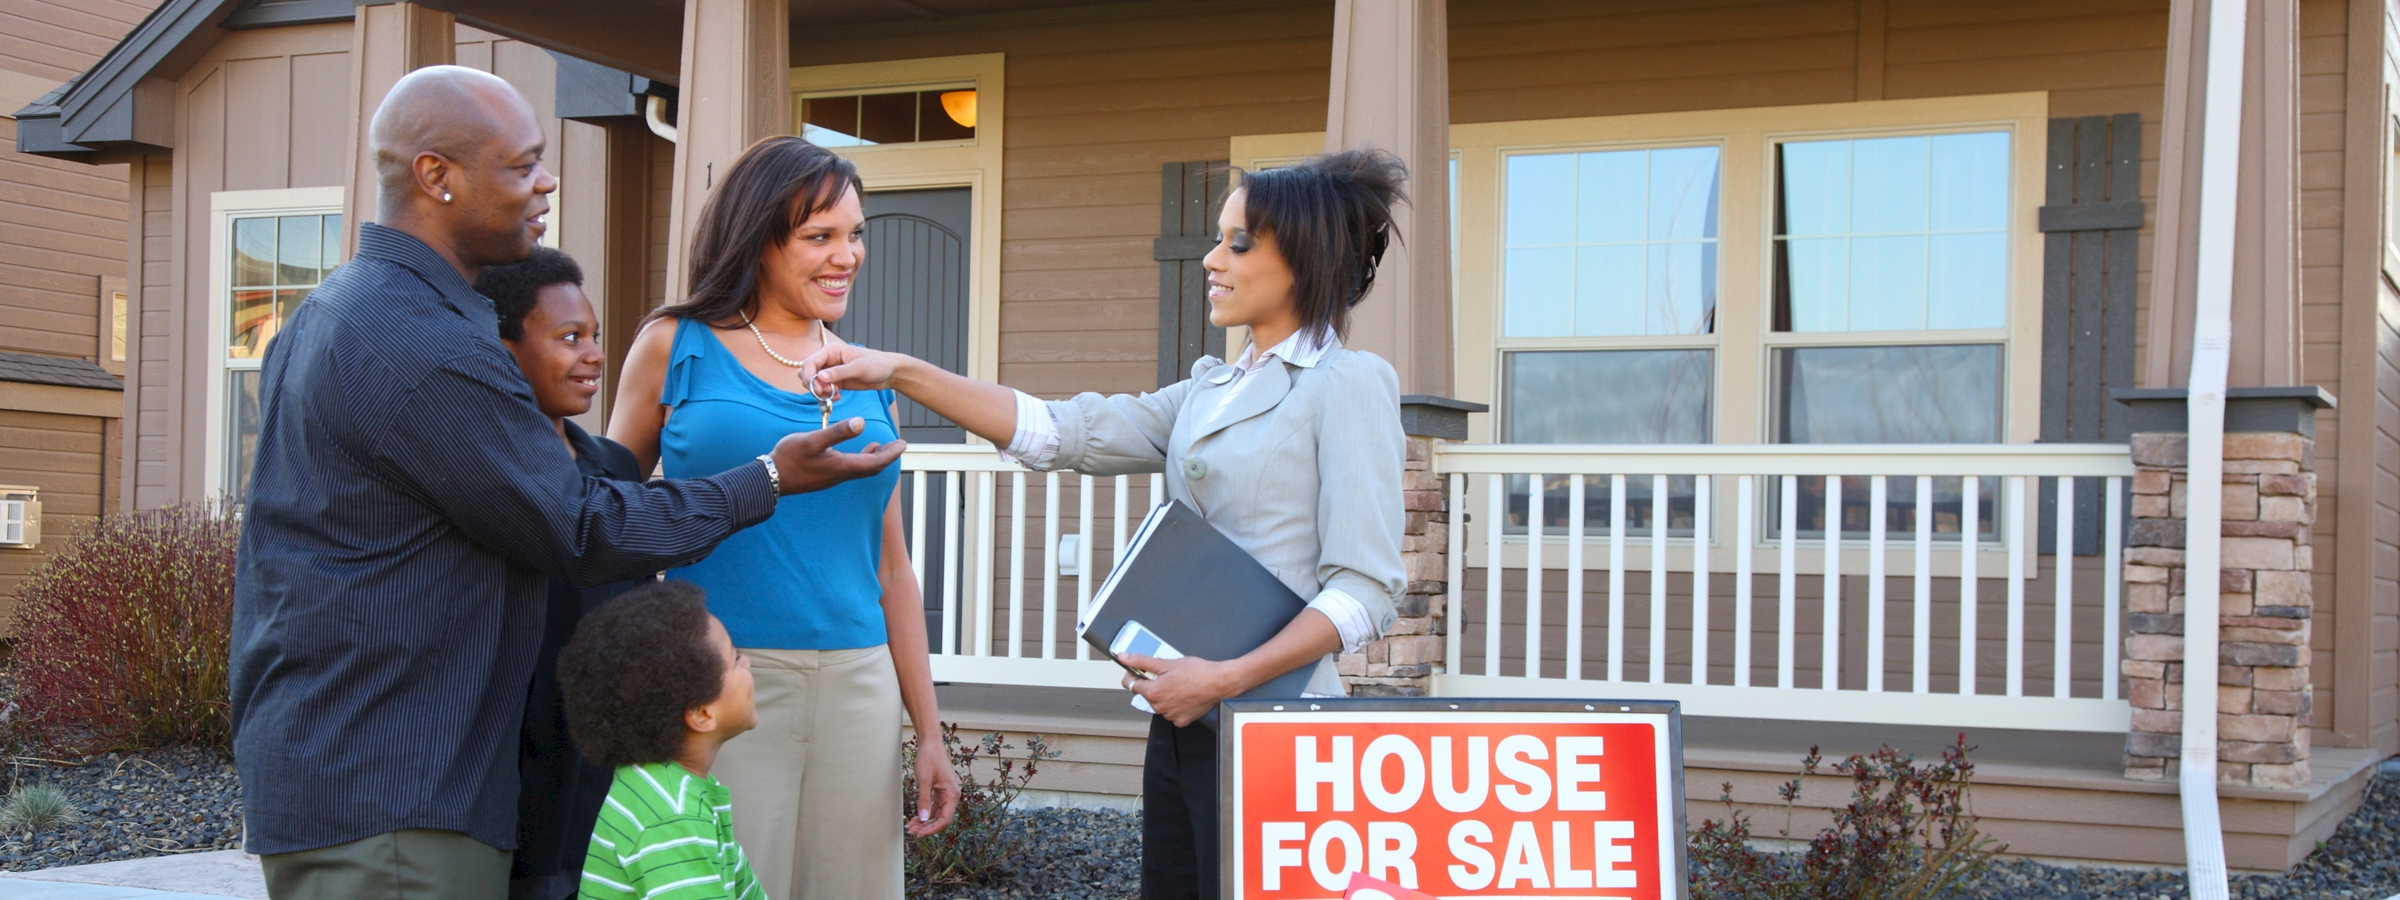 Should I hire a real estate attorney when selling my house?